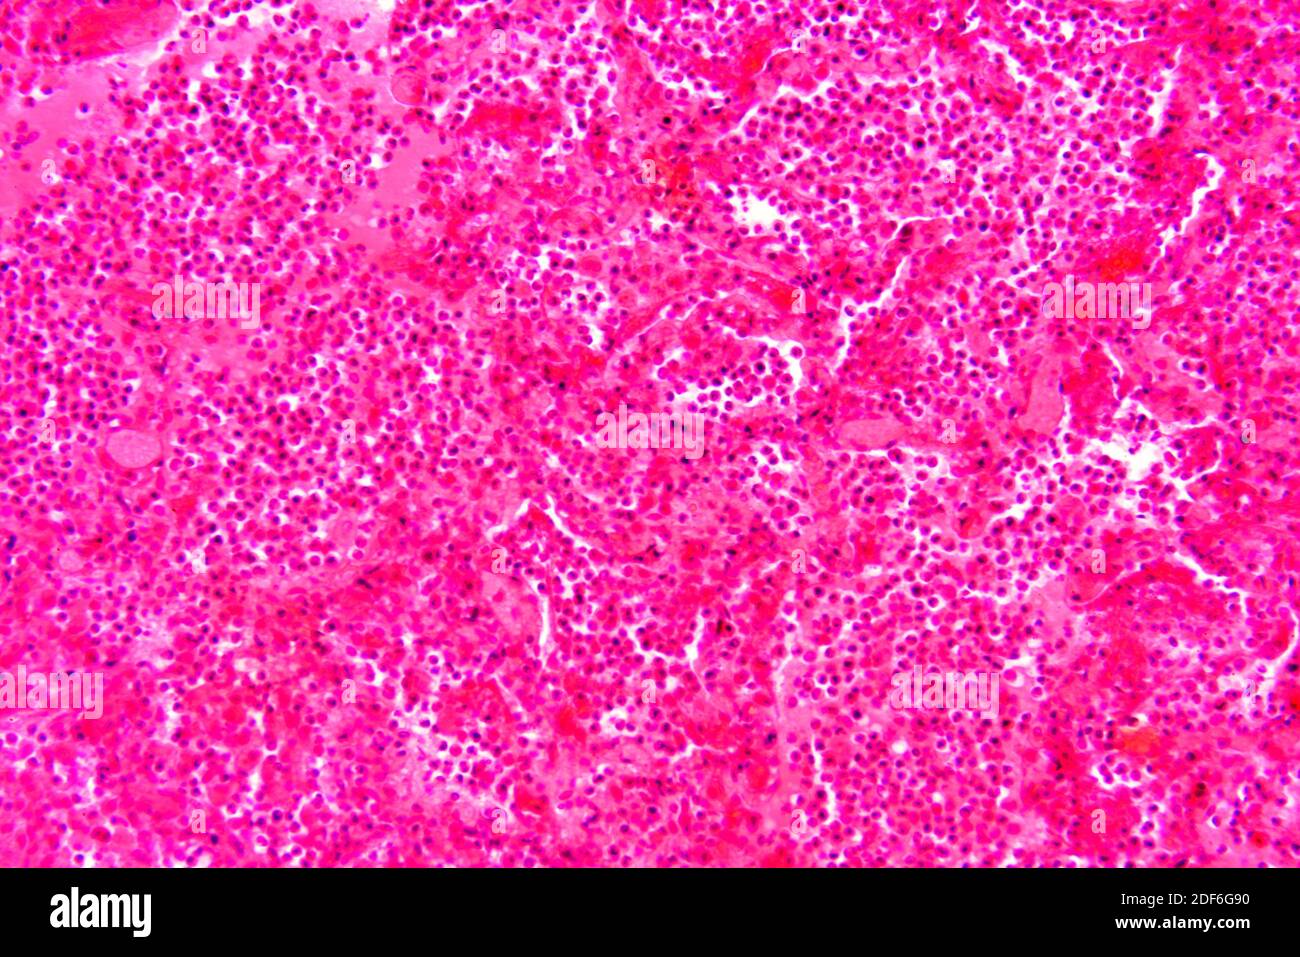 Human tuberculosis lung section. Optical microscope X200. Stock Photo